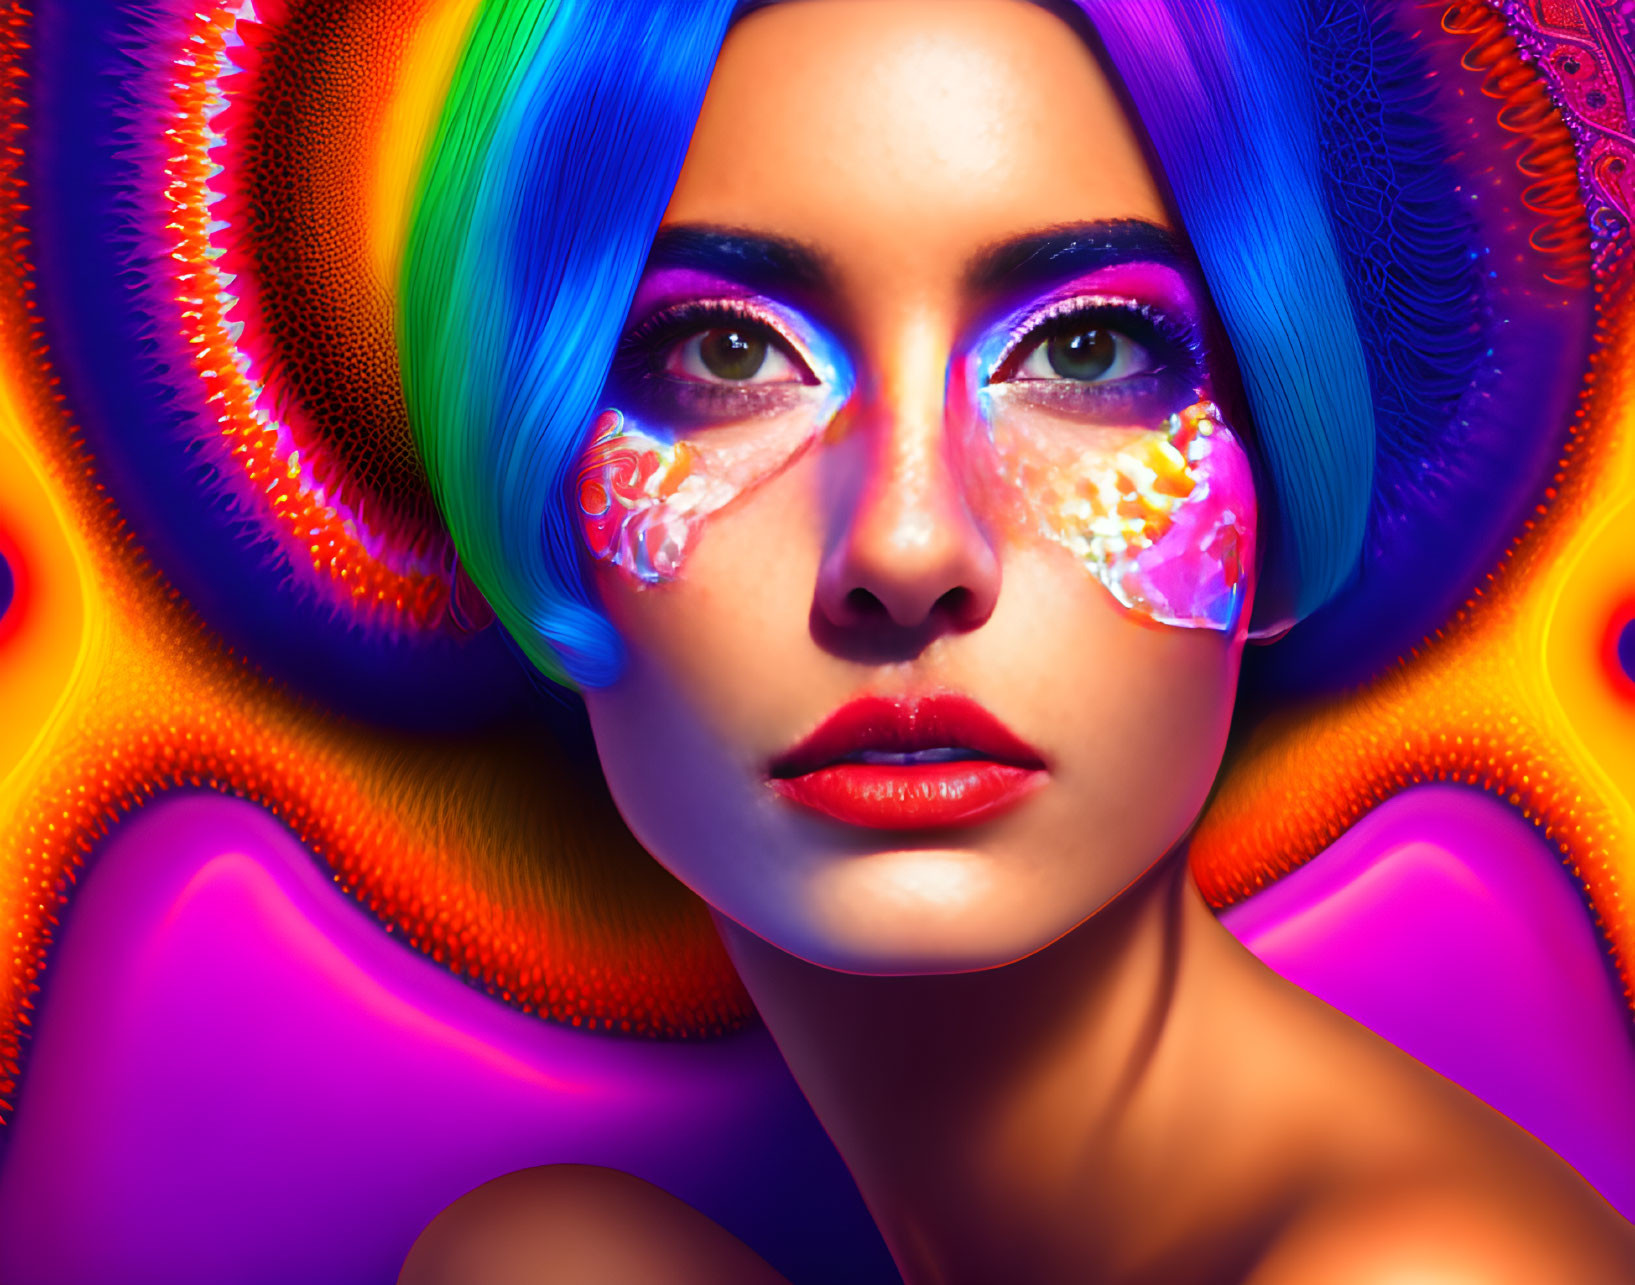 Colorful digital artwork: Woman with blue hair and striking makeup on psychedelic background